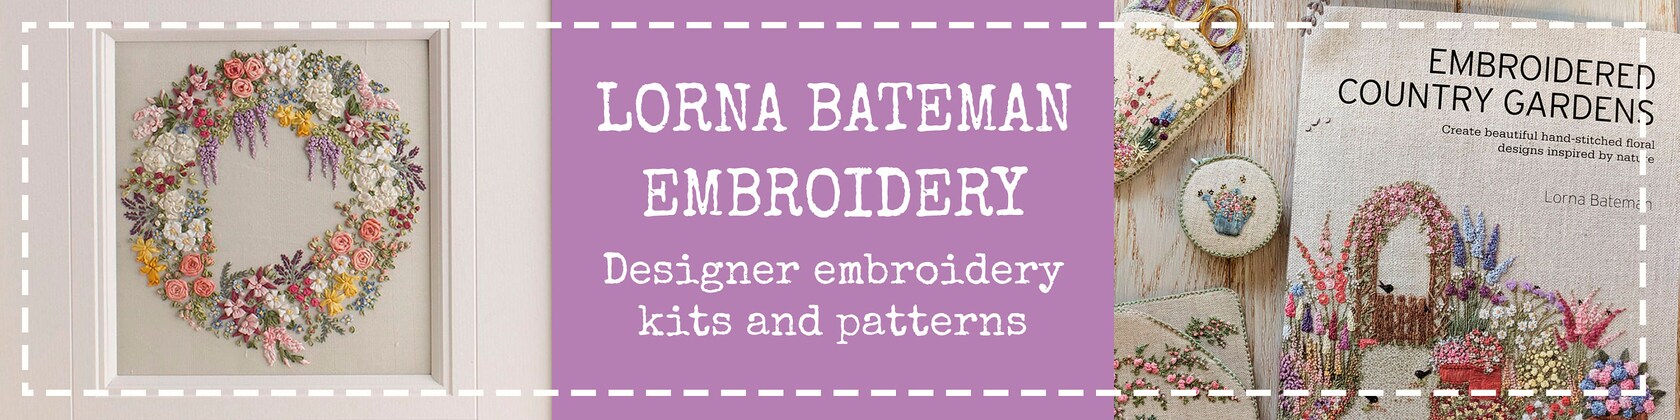 Tips for Ribbon Embroidery - Lorna Bateman Embroidery